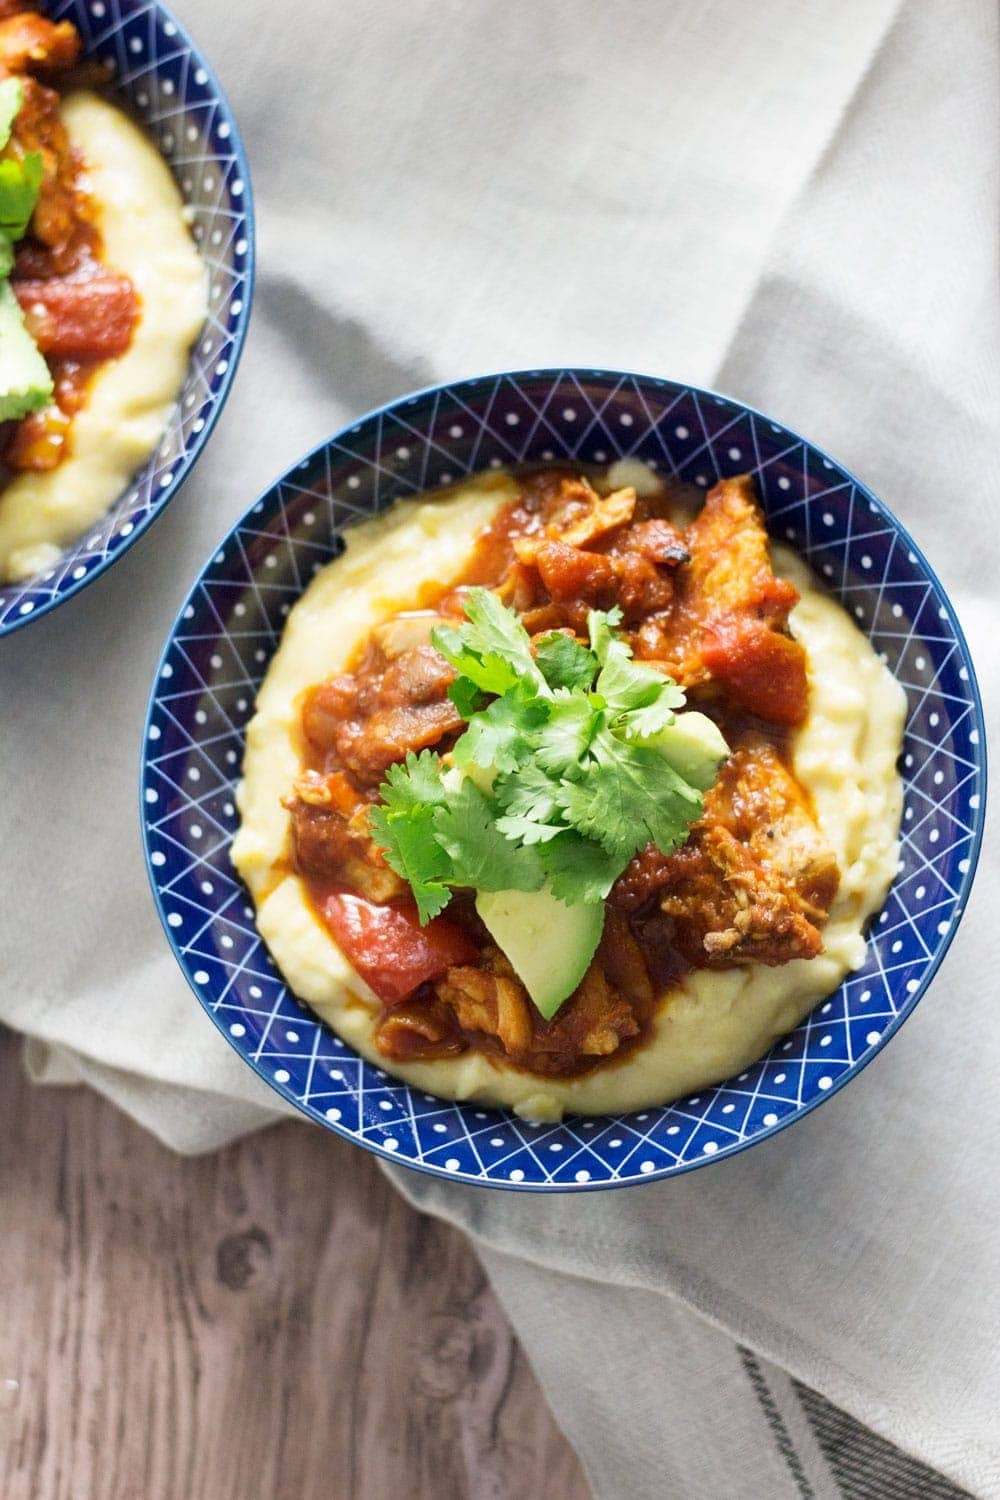 These spicy chicken burrito bowls with cheesy polenta are extreme comfort food and surprisingly quick to make! They're the perfect weeknight winter dinner.